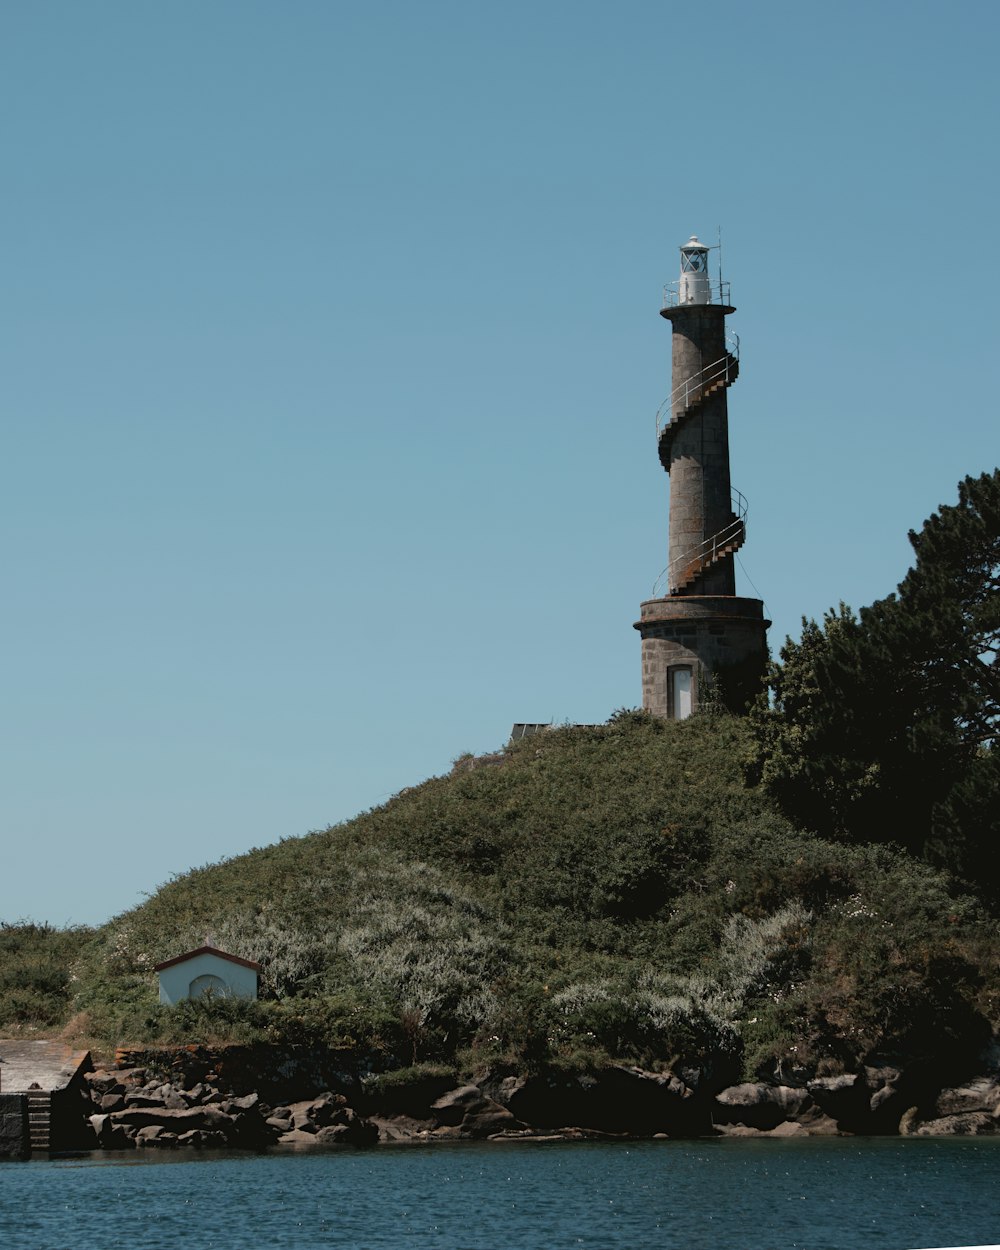 a lighthouse on top of a hill next to a body of water